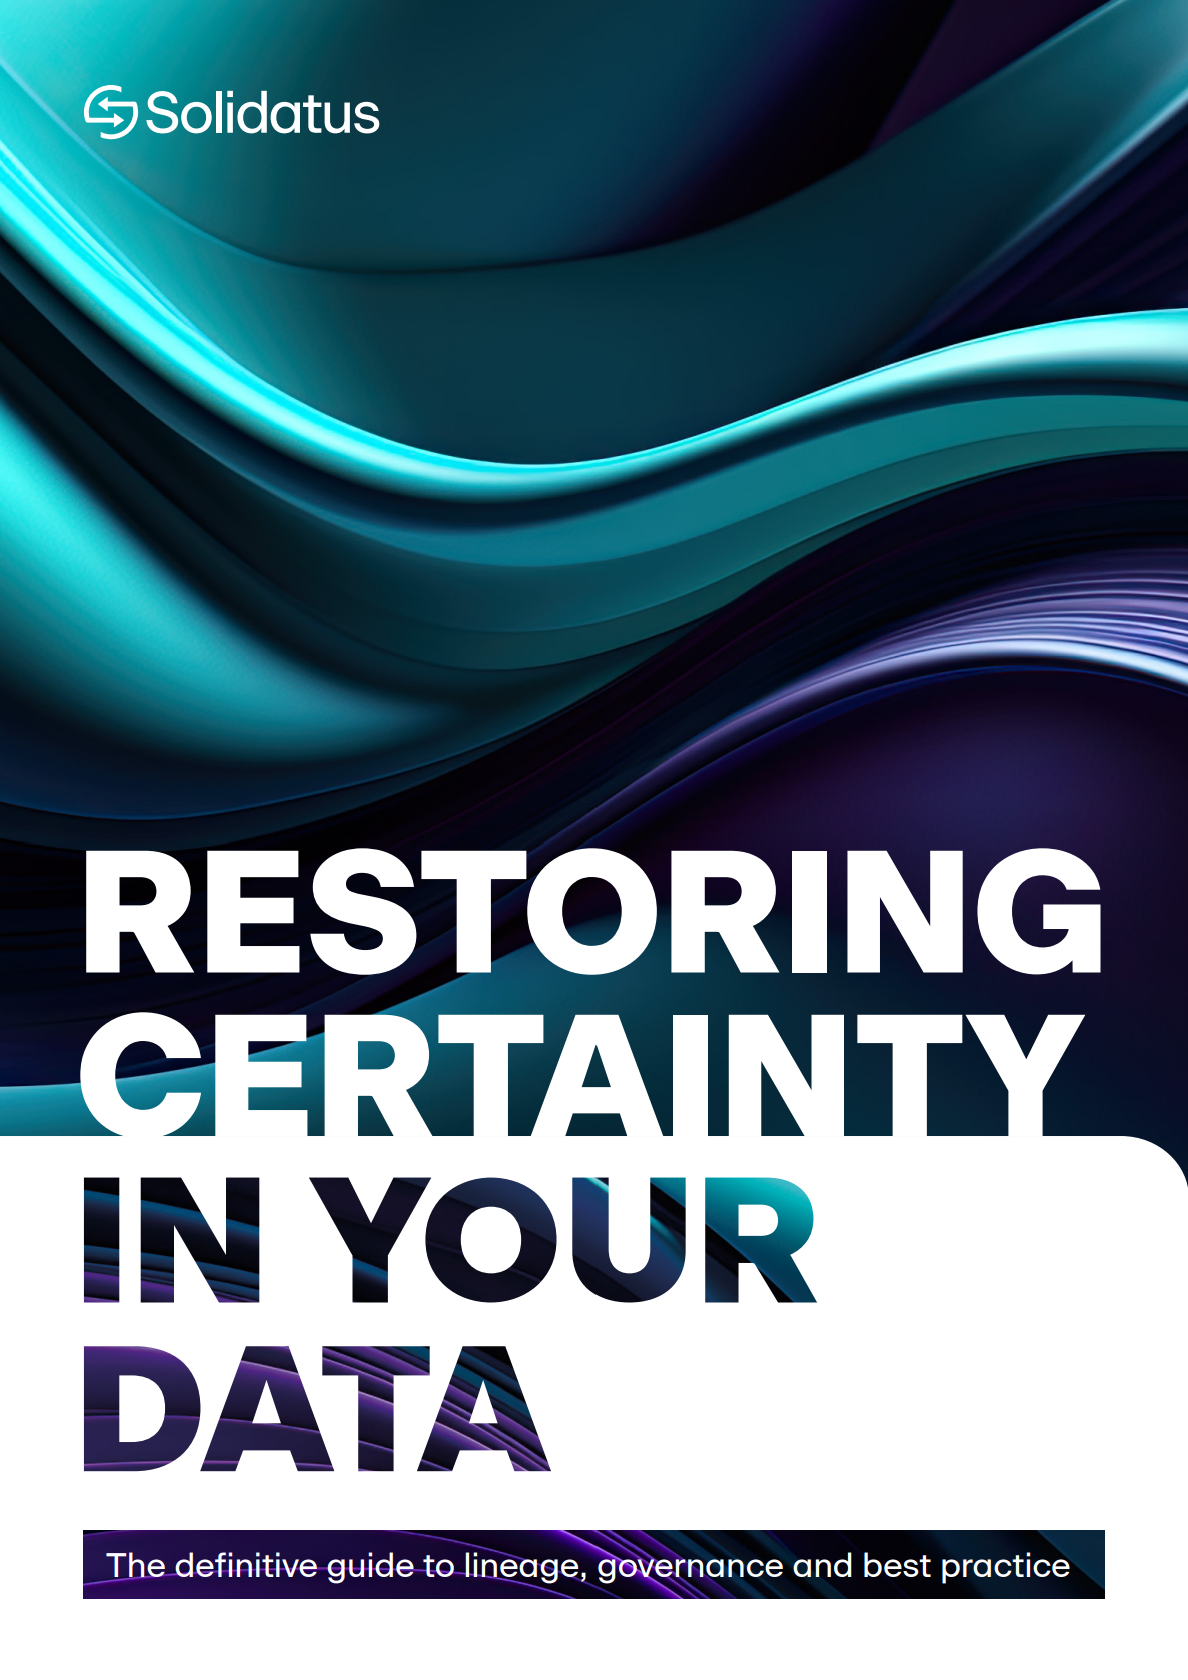 Restoring certainty in your data thumbnail